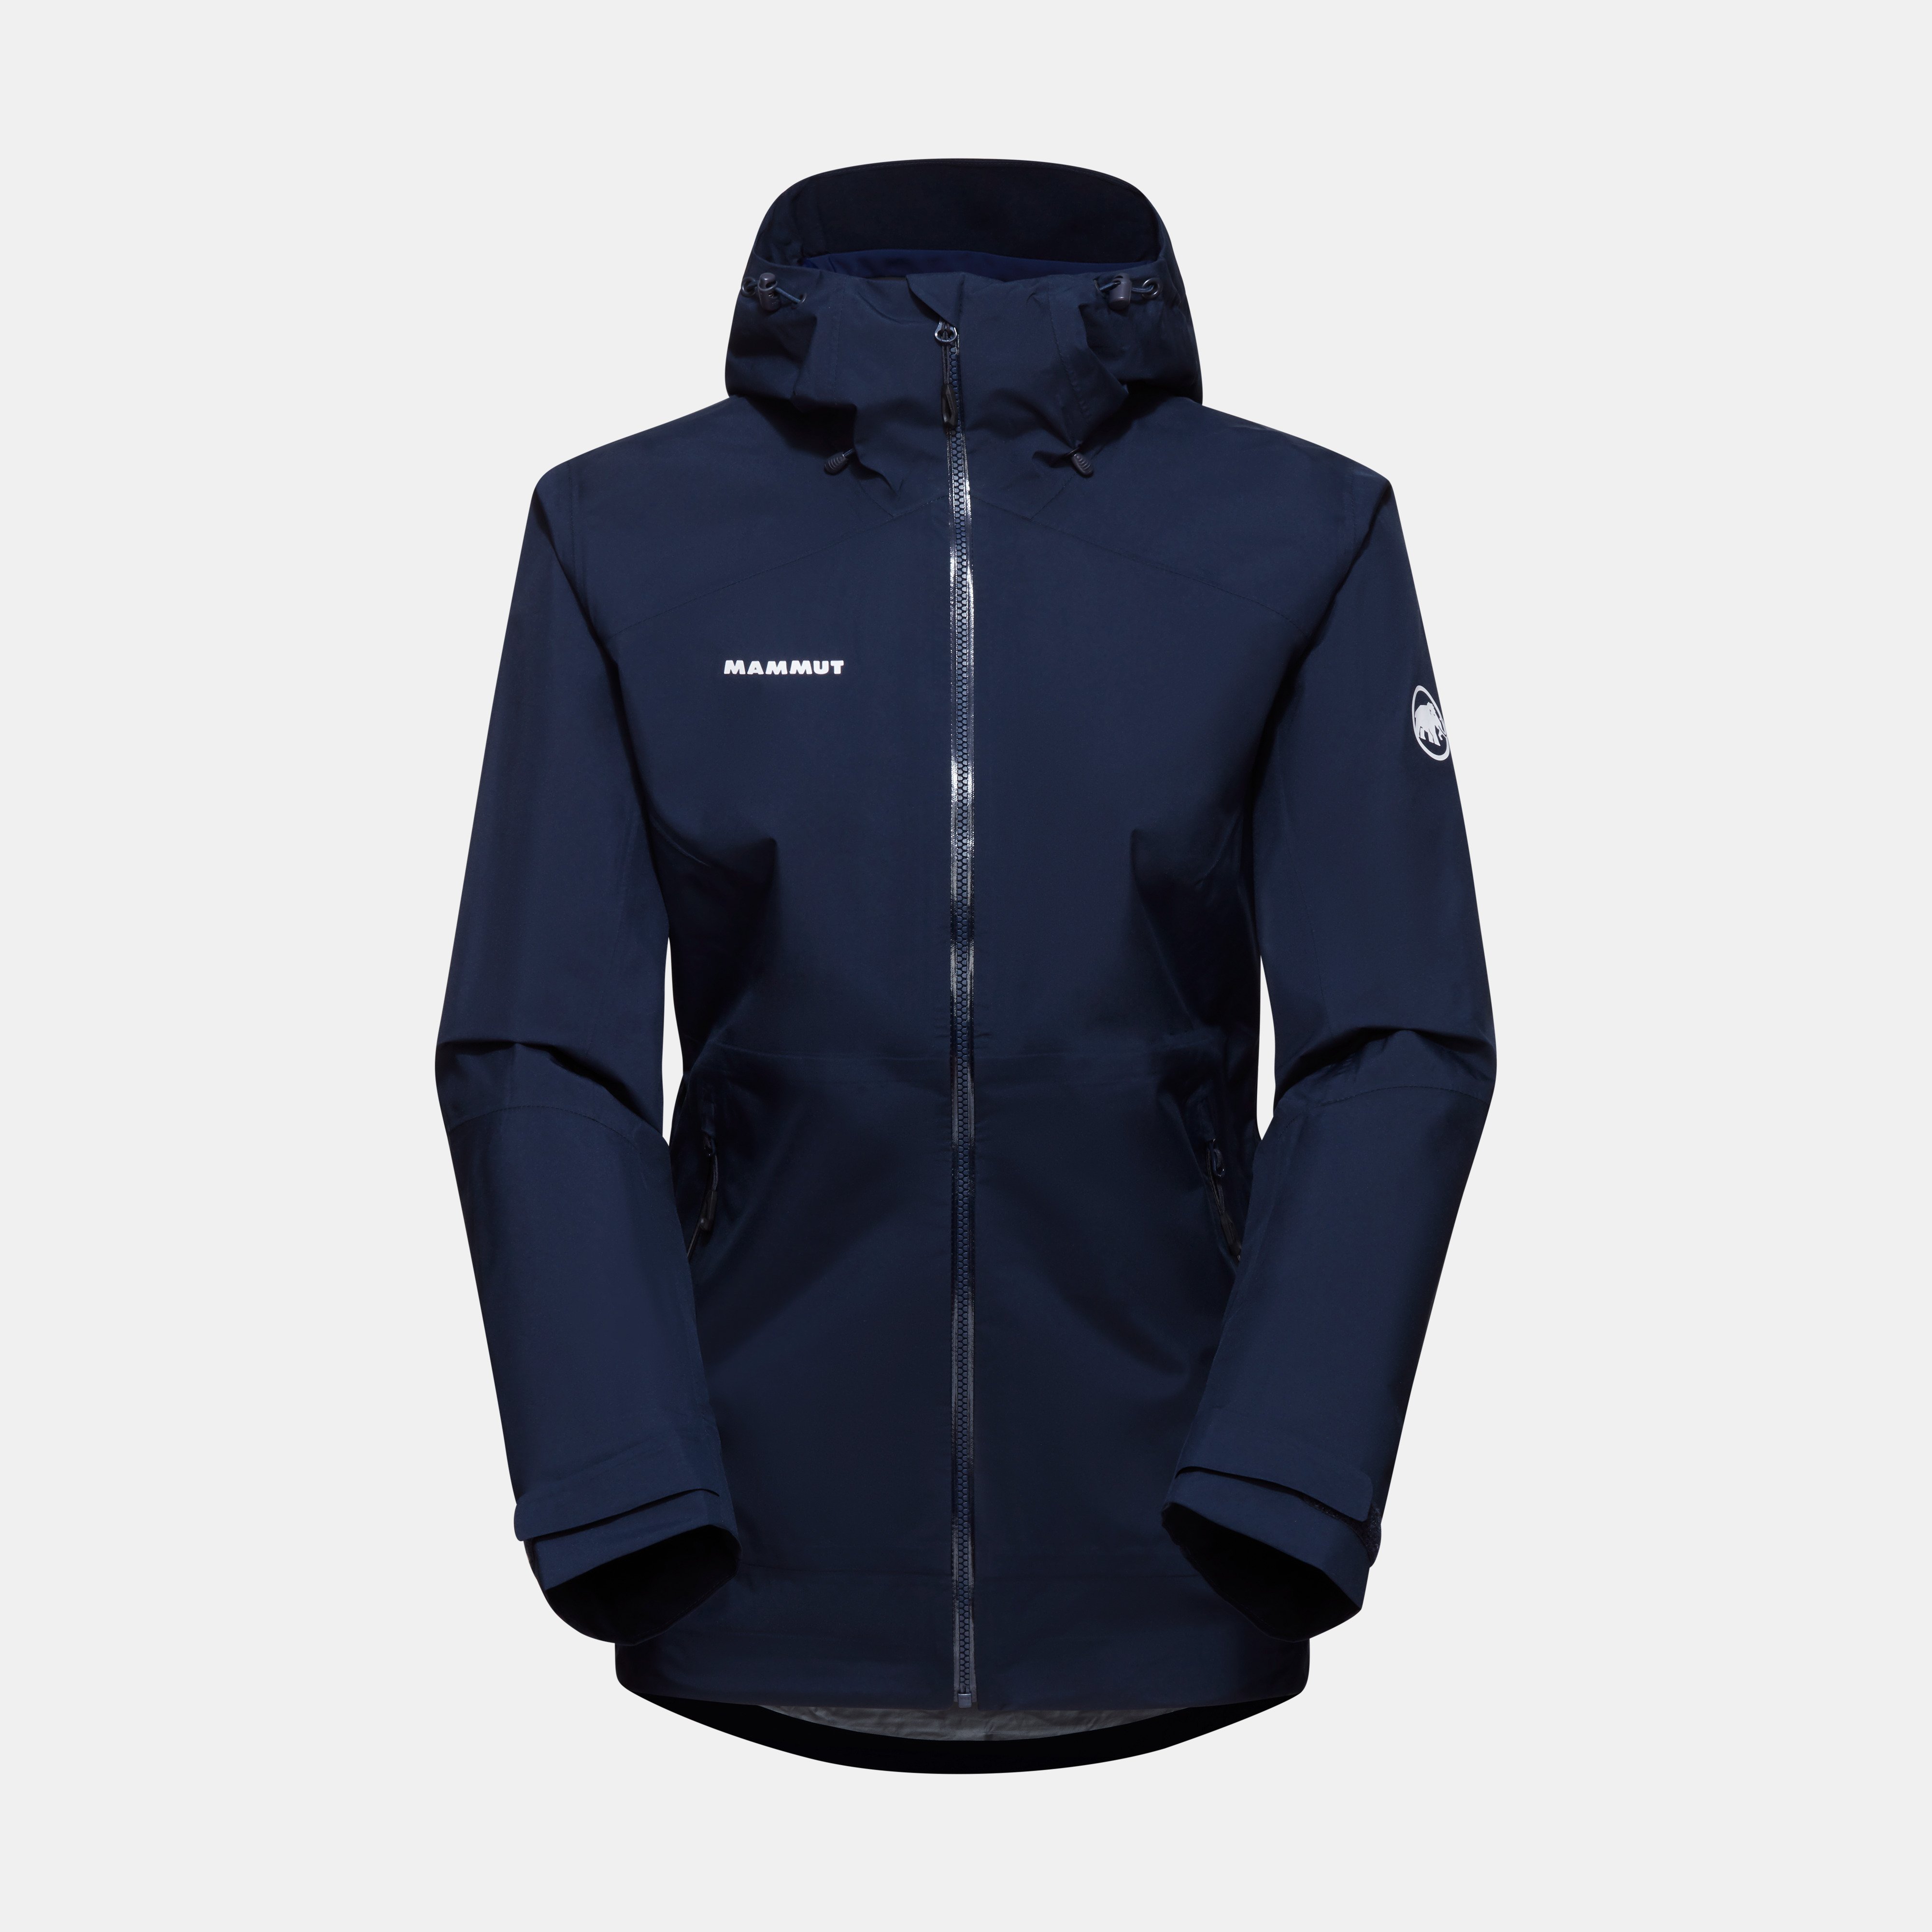 Unlock Wilderness' choice in the North Face Vs Mammut comparison, the Convey Tour HS Hooded Jacket by Mammut